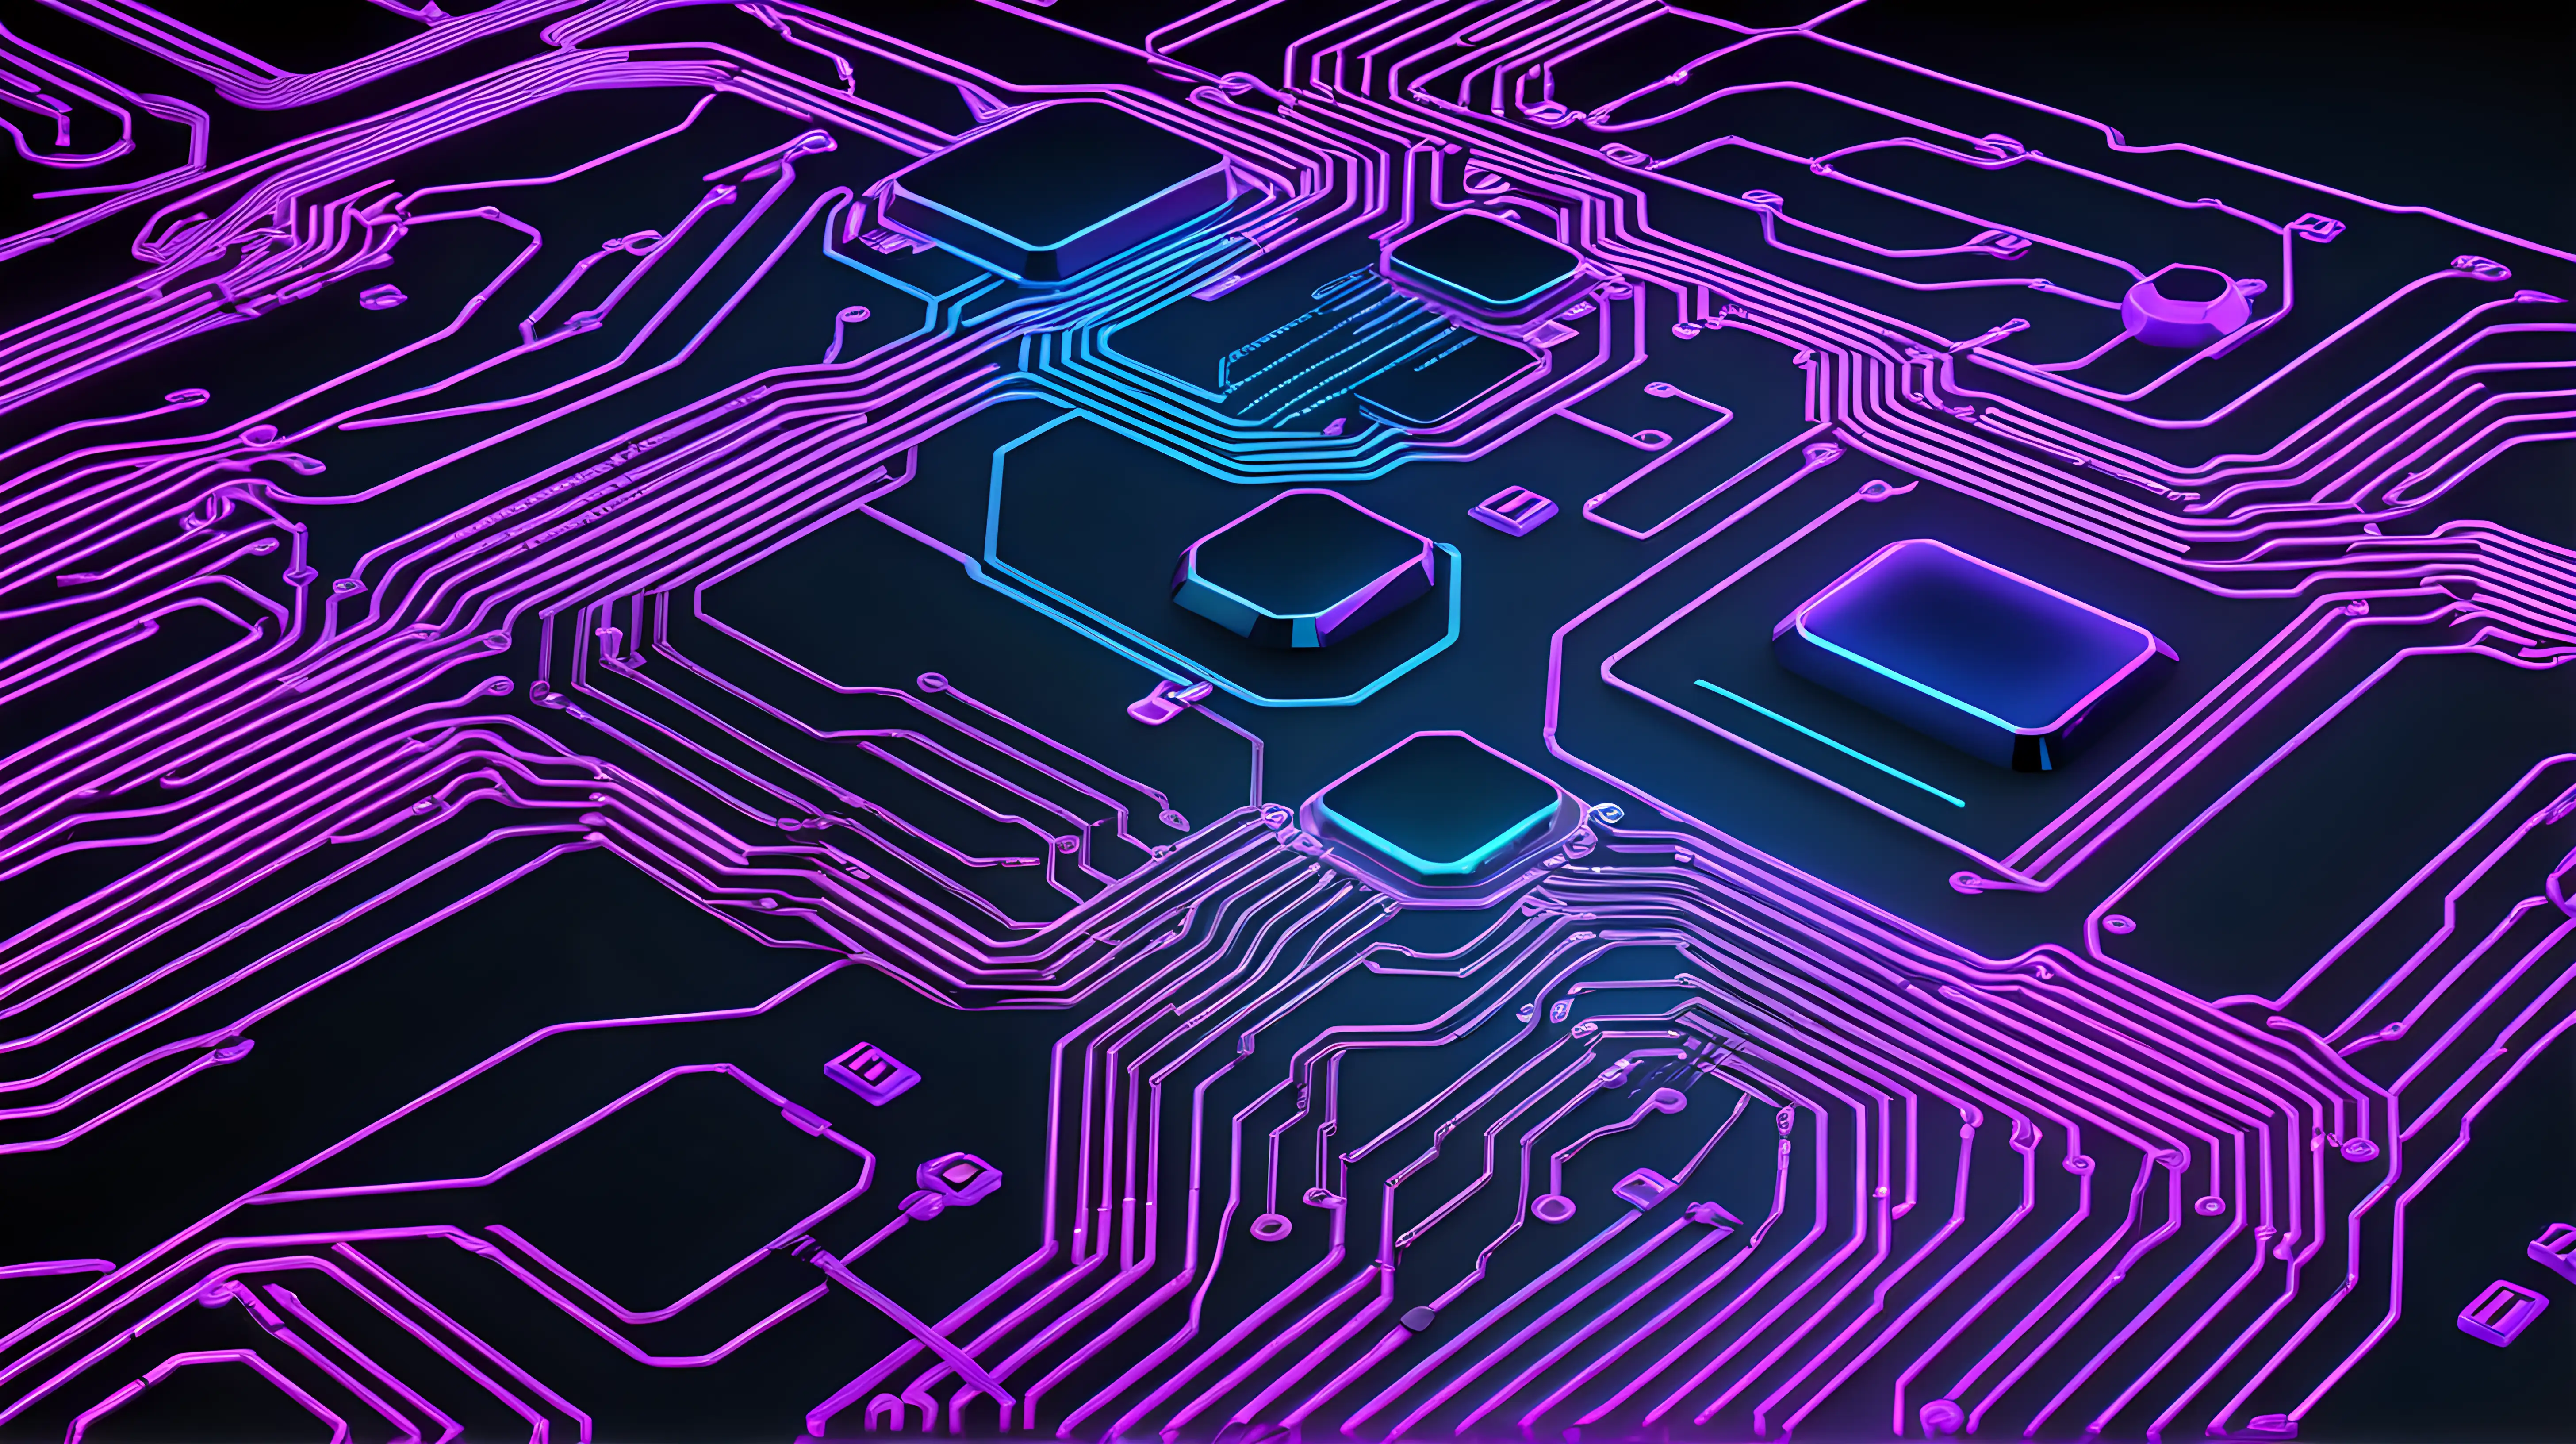 Futuristic Circuitry: Design a background resembling futuristic circuit boards or electronic pathways. The neon lines can then represent the flow of energy within a high-tech, cyberpunk-inspired environment.